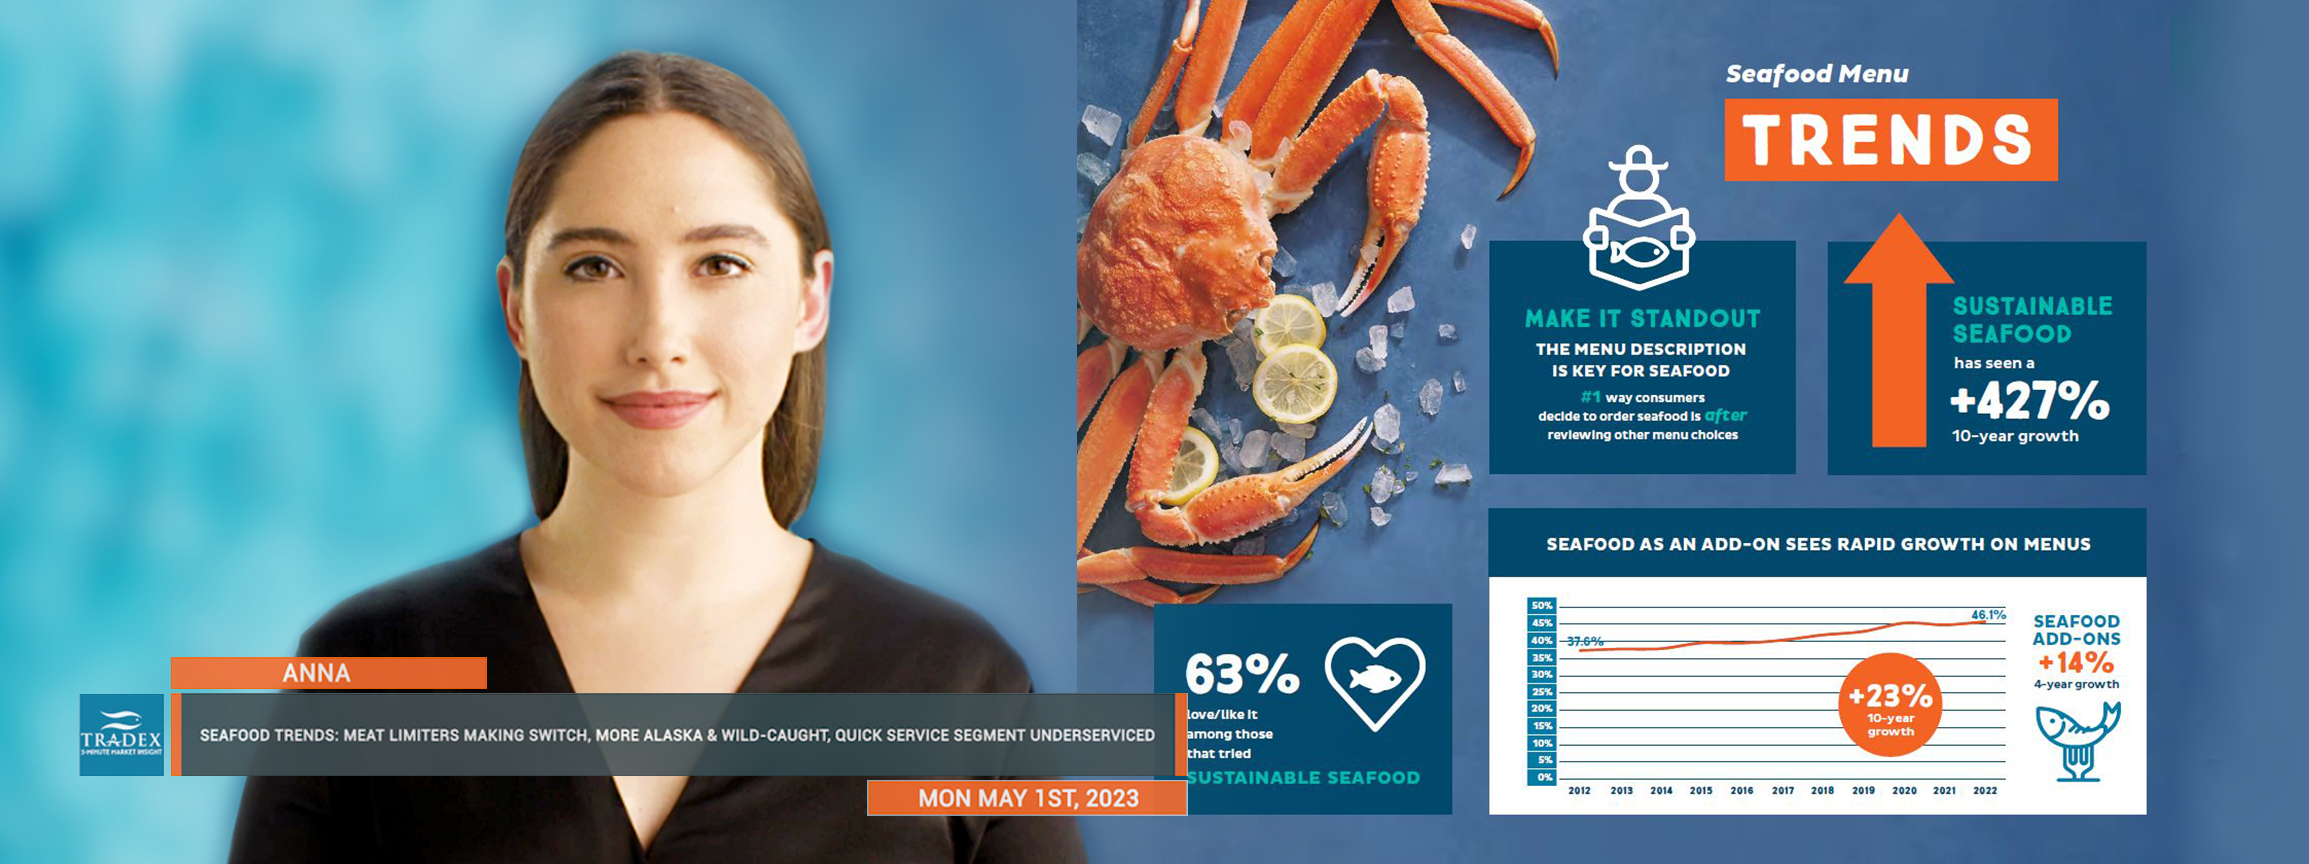 CONSUMER SEAFOOD TRENDS